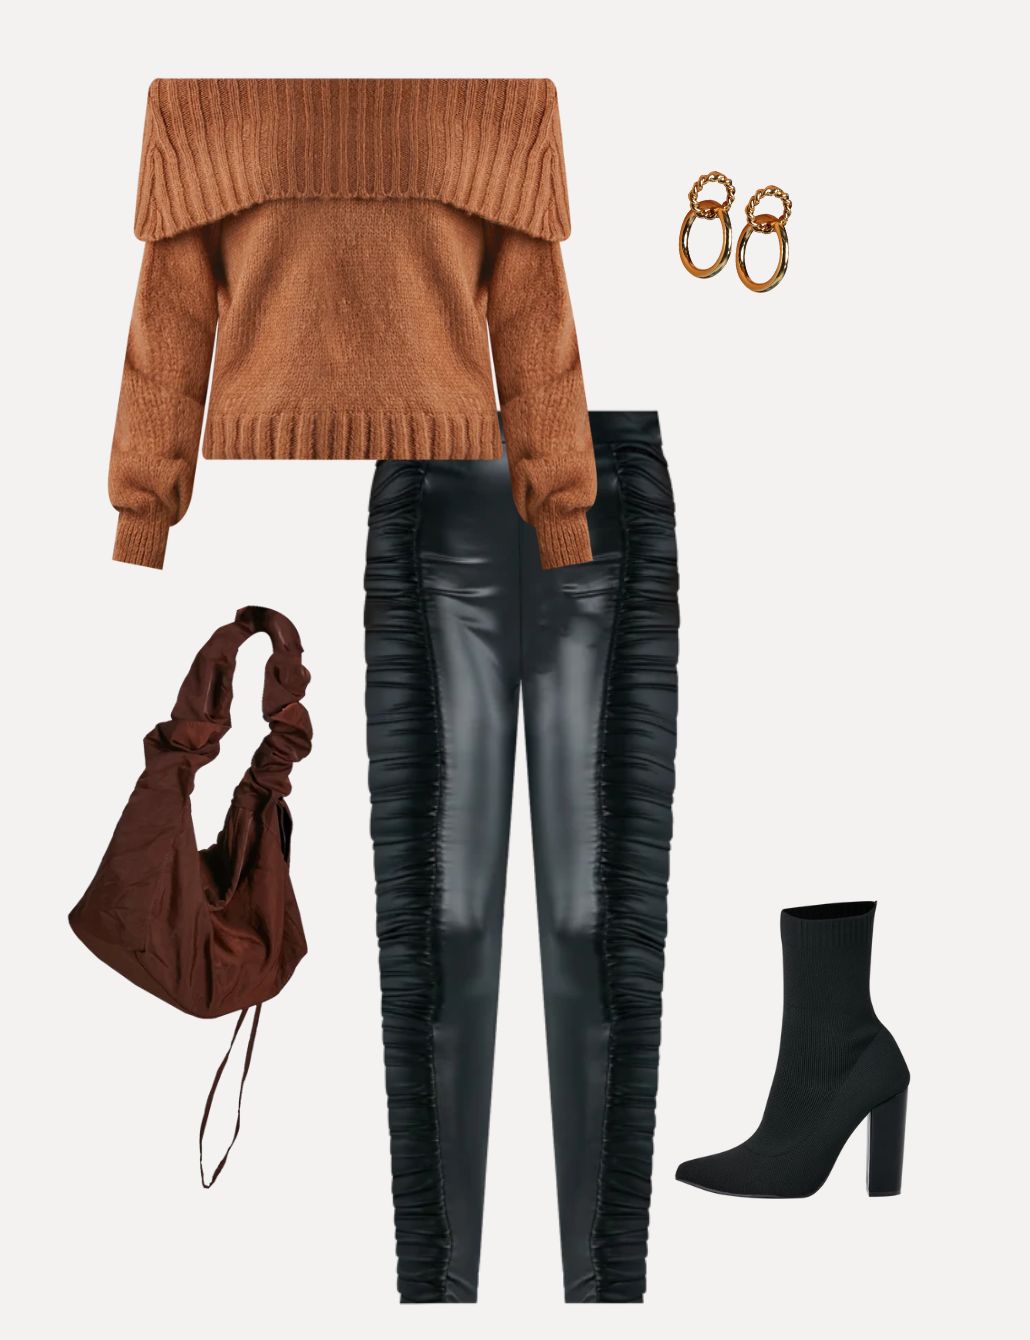 Brown Suede Ankle Boots with Black Leather Leggings Outfits (5